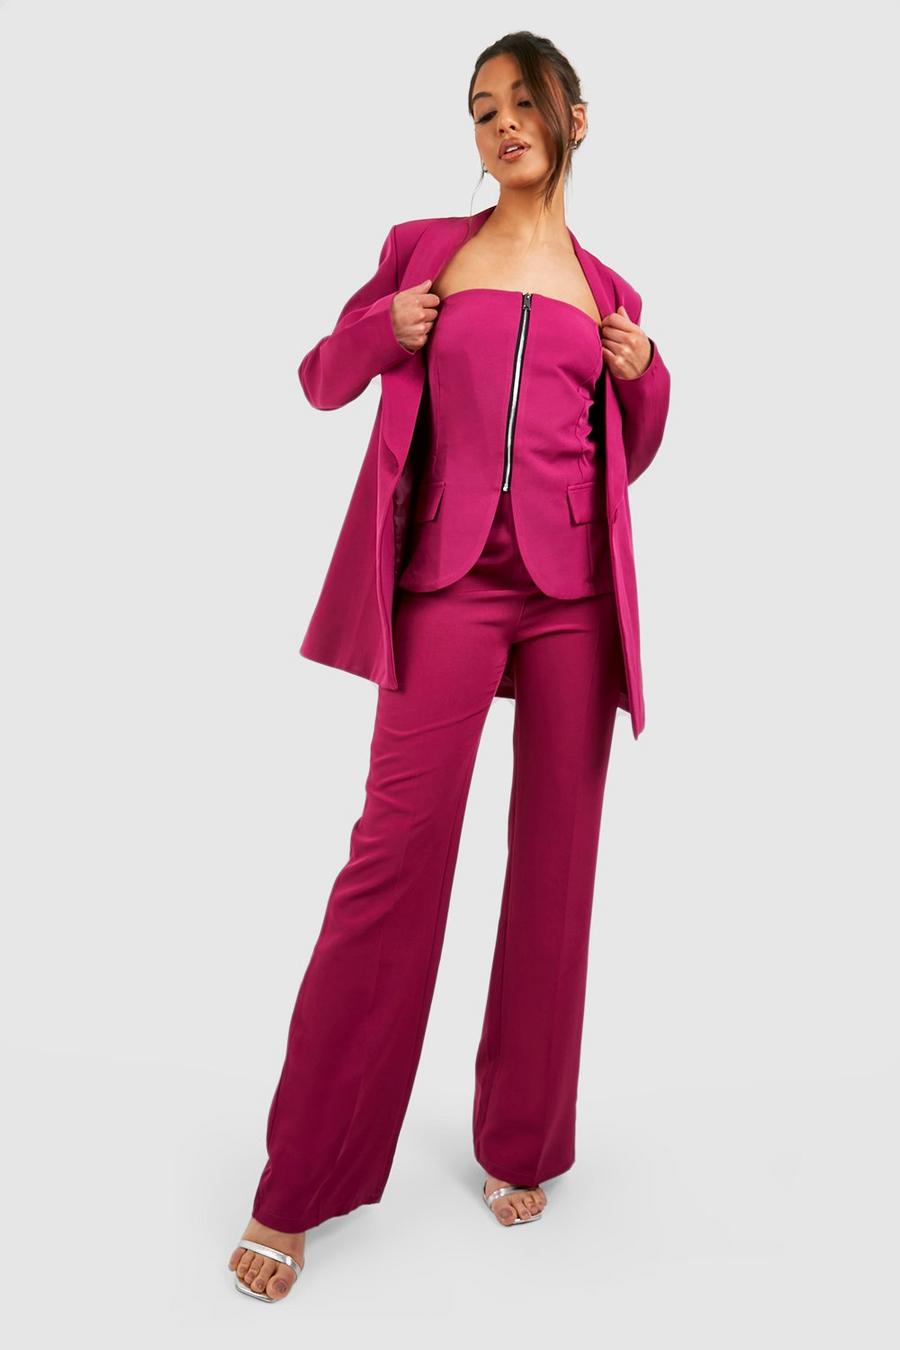 Magenta Fit & Flare Tailored Pants